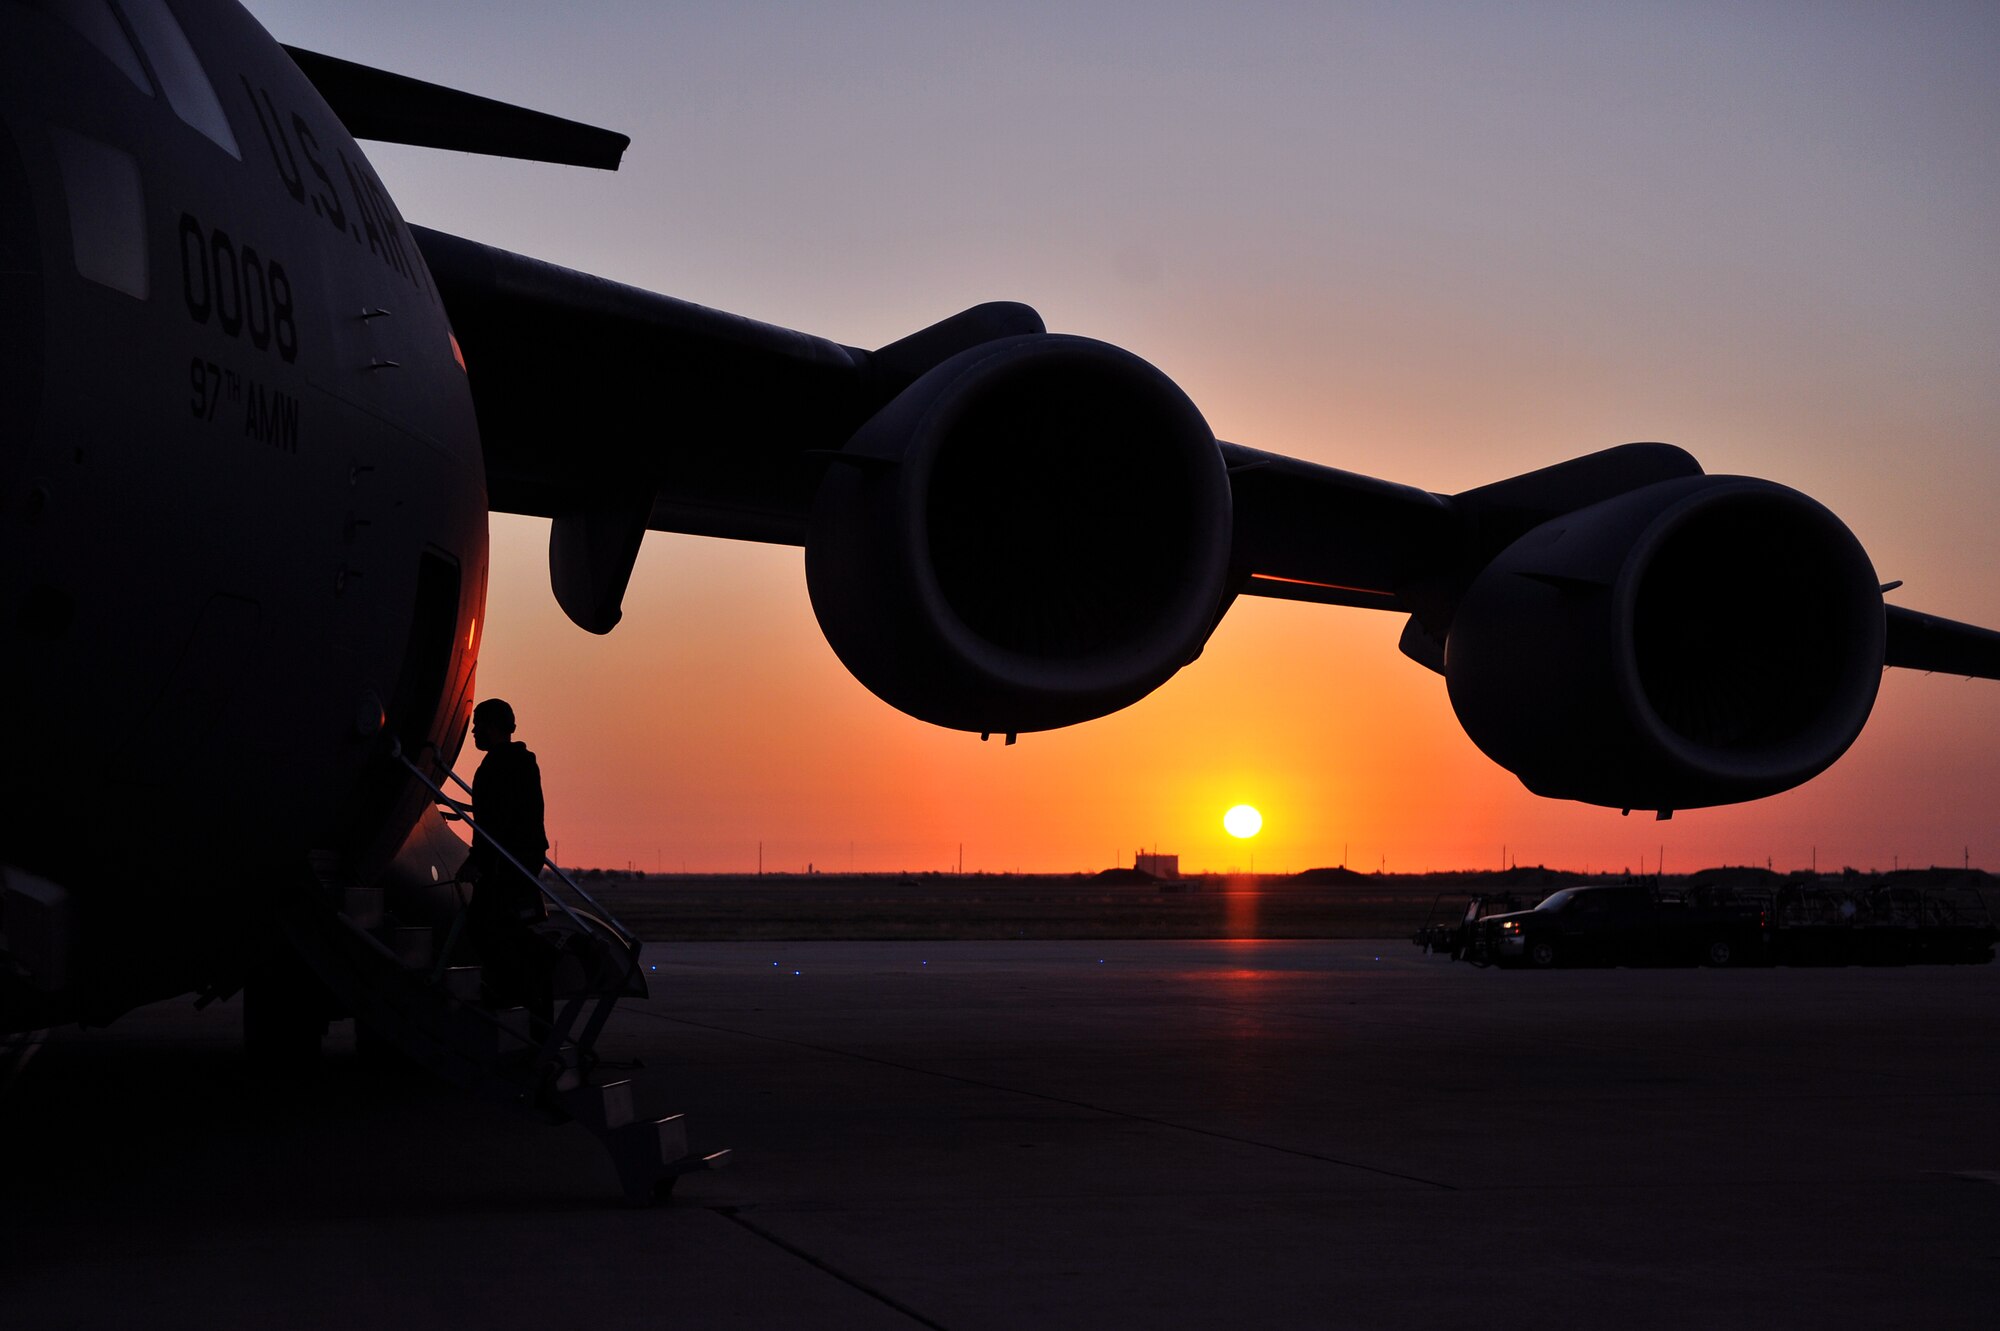 ALTUS AIR FORCE BASE, Okla. – A crew member from the 97th Air Mobility Wing boards a U.S. Air Force C-17 Globemaster III cargo aircraft before a training flight Oct. 30, 2014. The 58th Airlift Squadron’s mission is to train tomorrow’s C-17 pilots and loadmasters to support the U.S. Air Force and contingency operations worldwide. (U.S. Air Force Photo by Senior Airman Dillon Davis/Released)